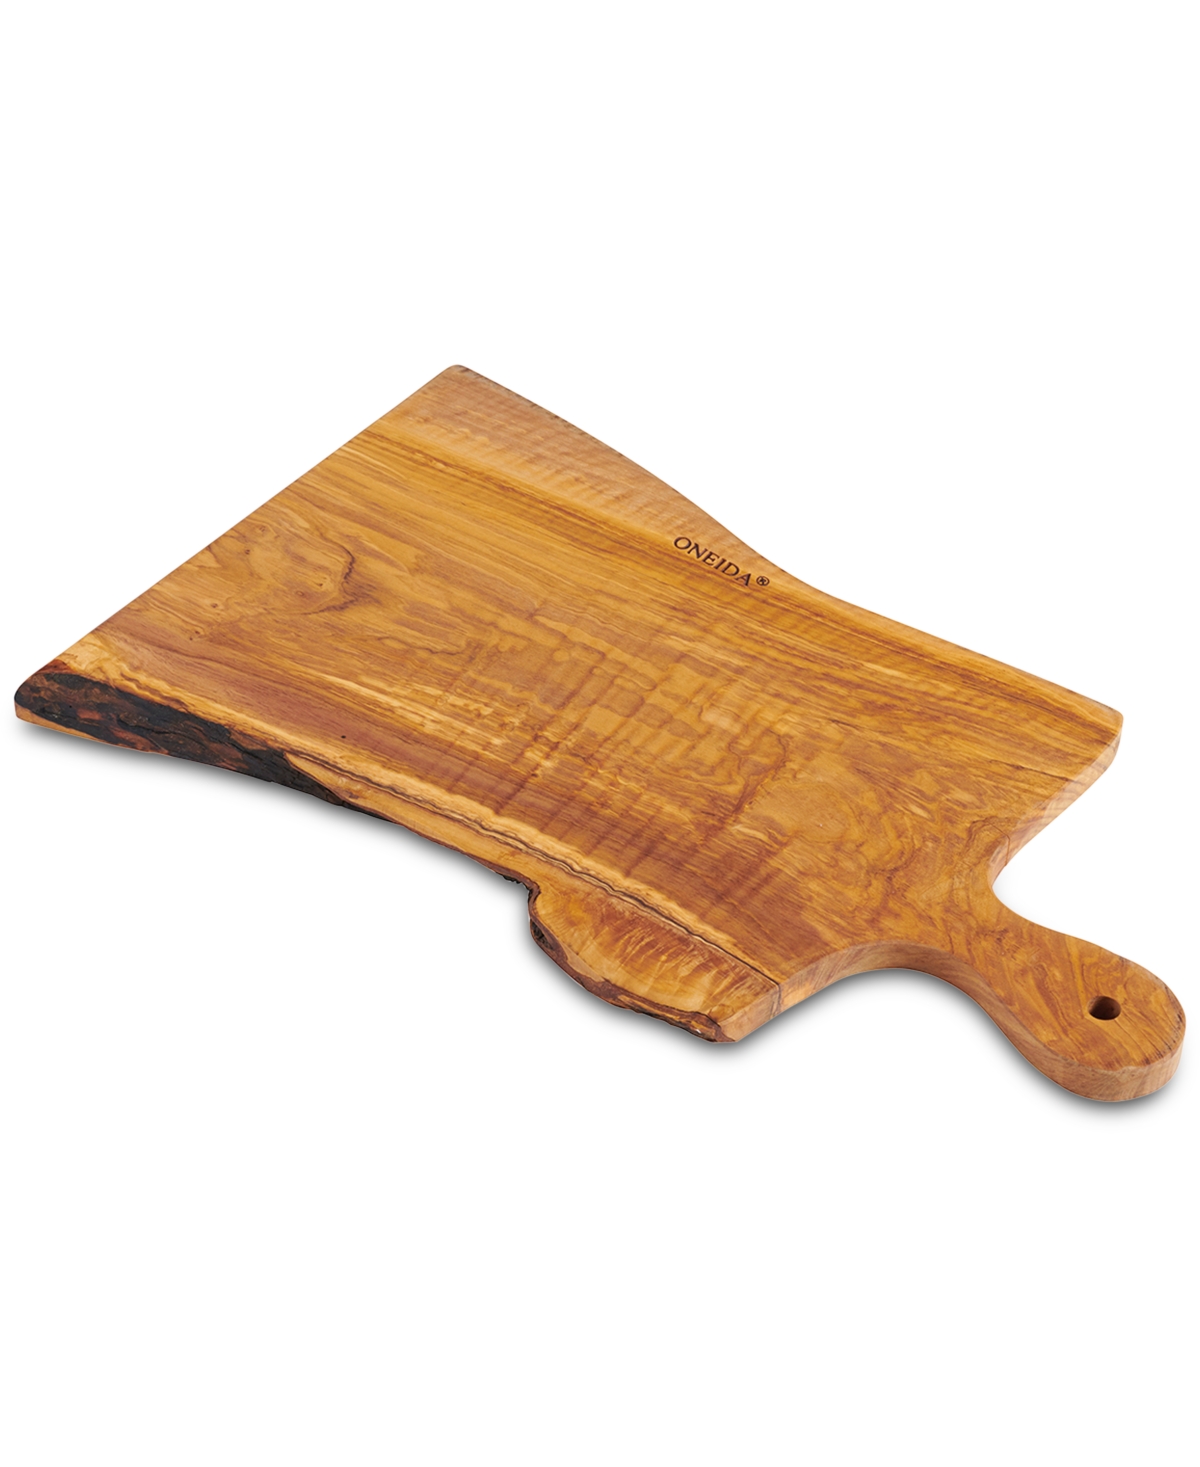 Organically Shaped Medium Olive Wood Board with Hanging Handle